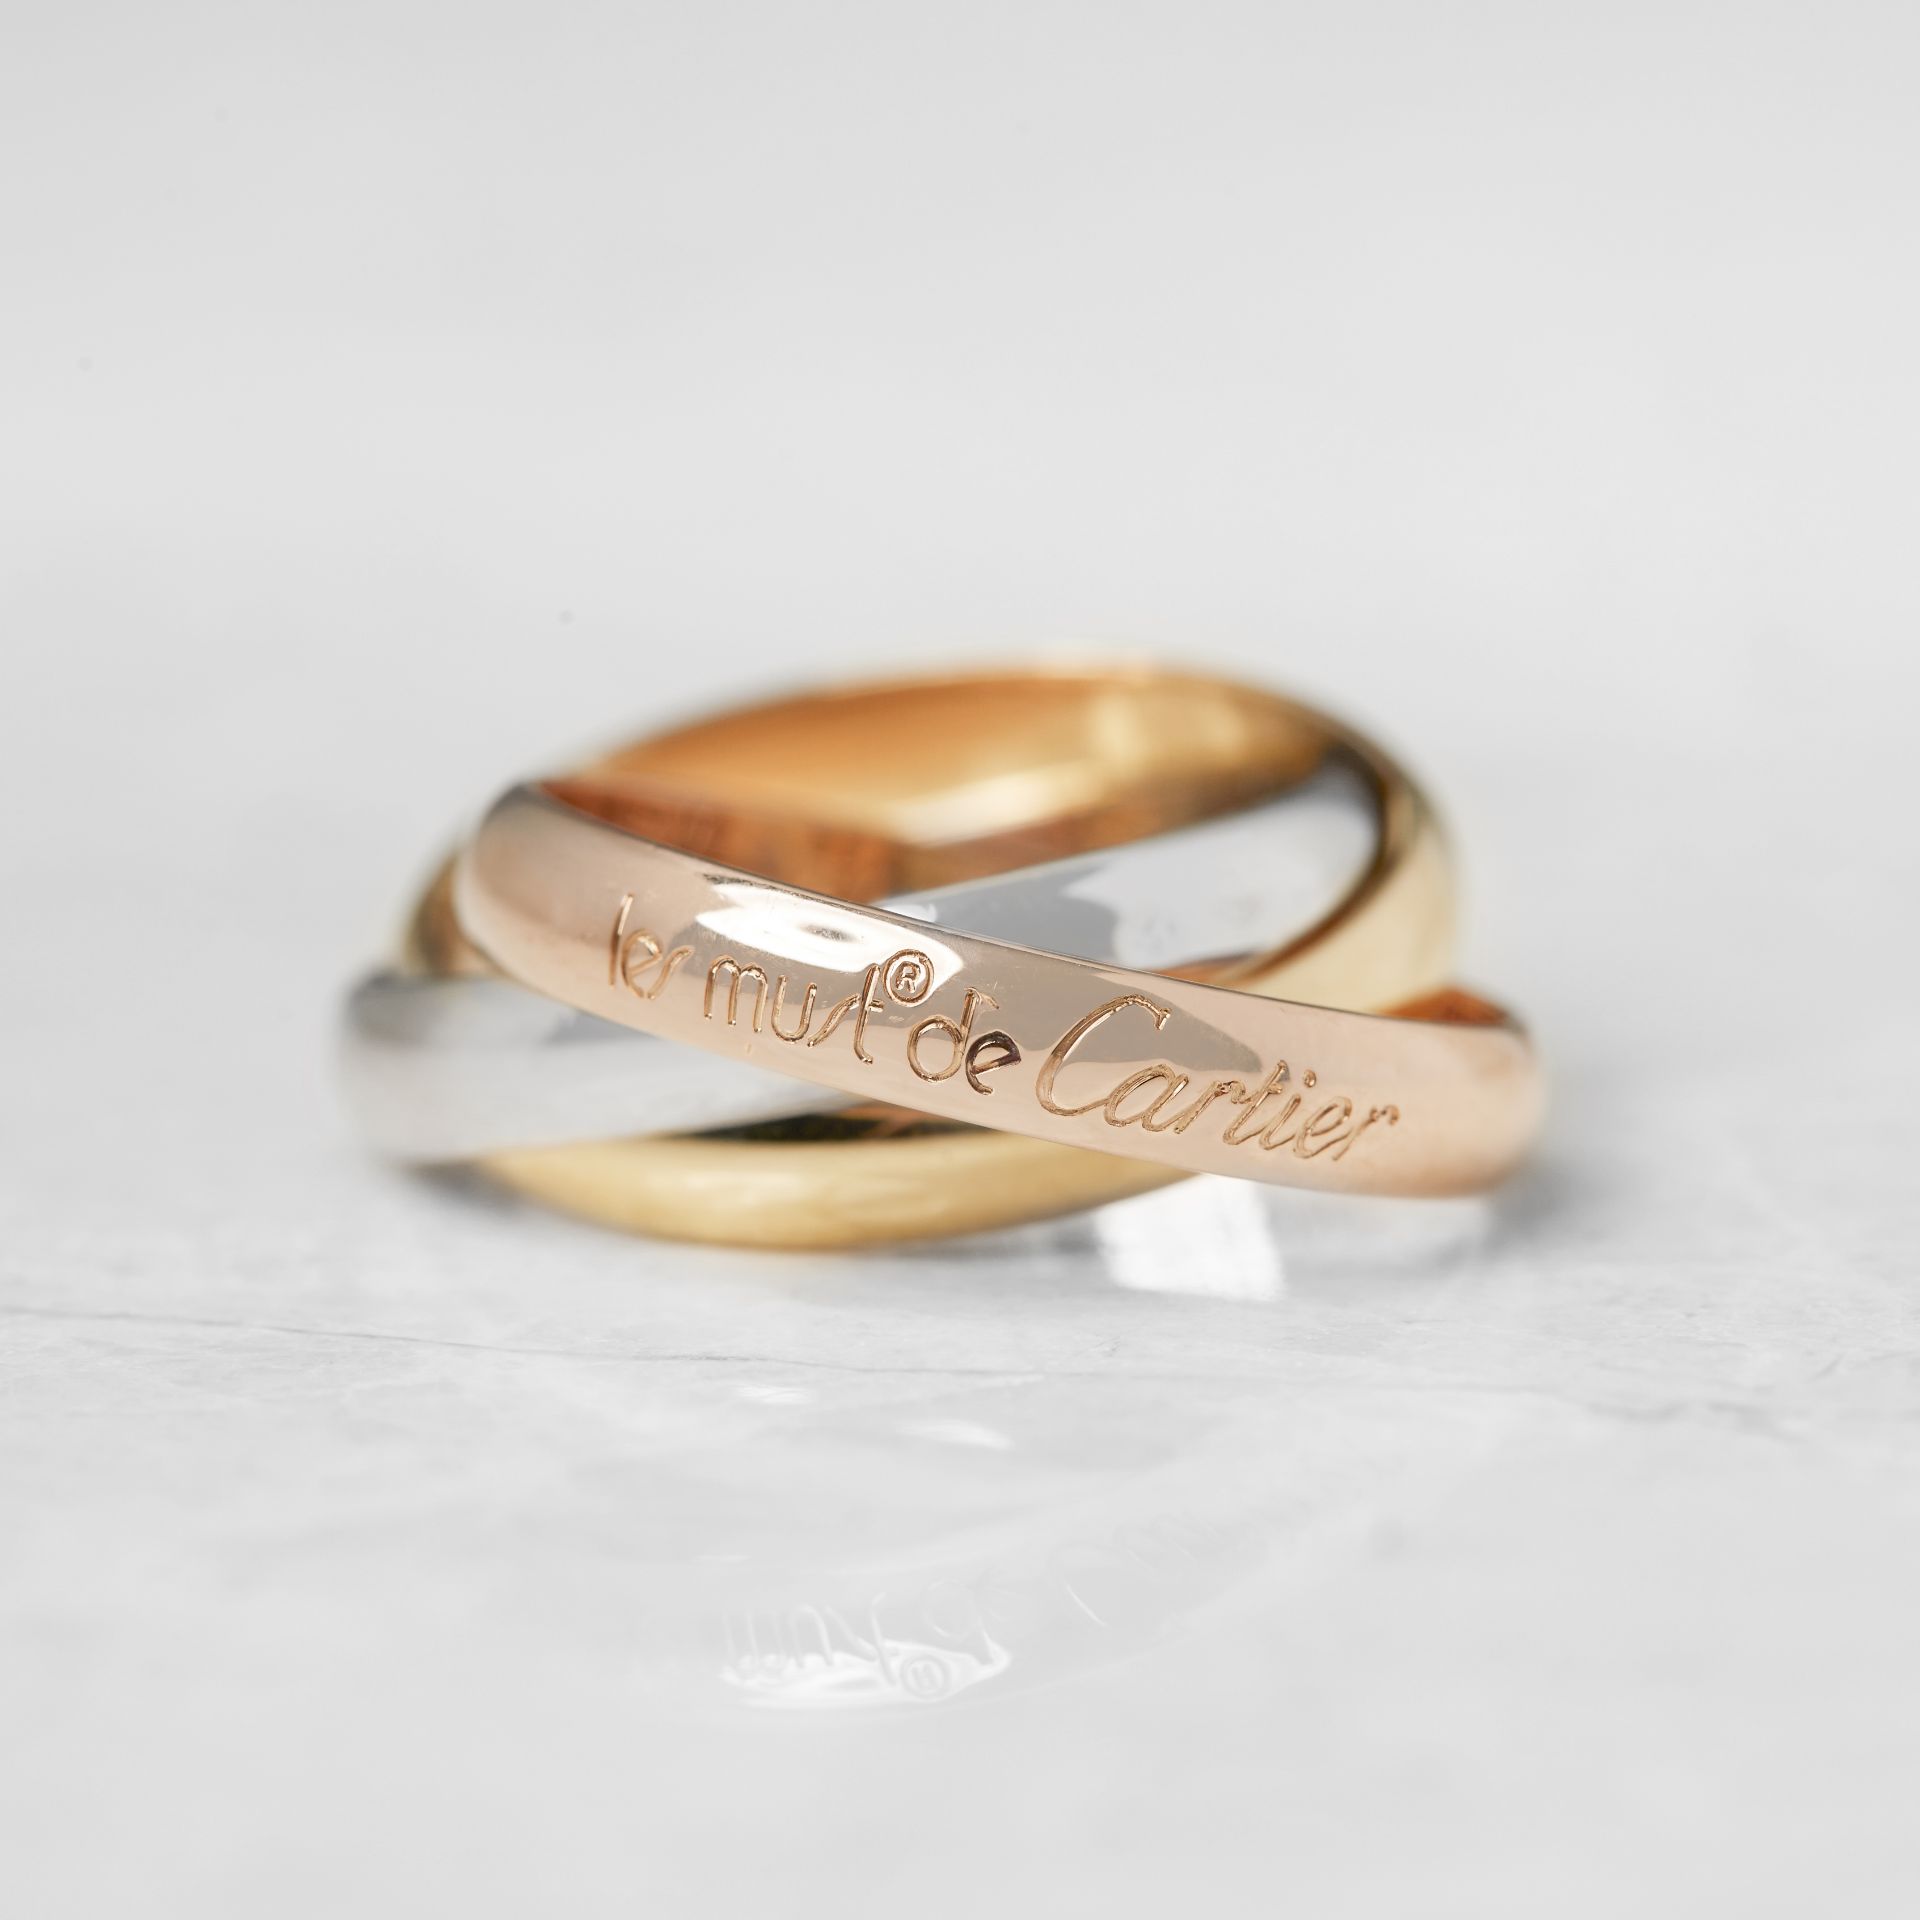 Cartier 18k Yellow, White & Rose Gold Trinity Ring - Image 10 of 18